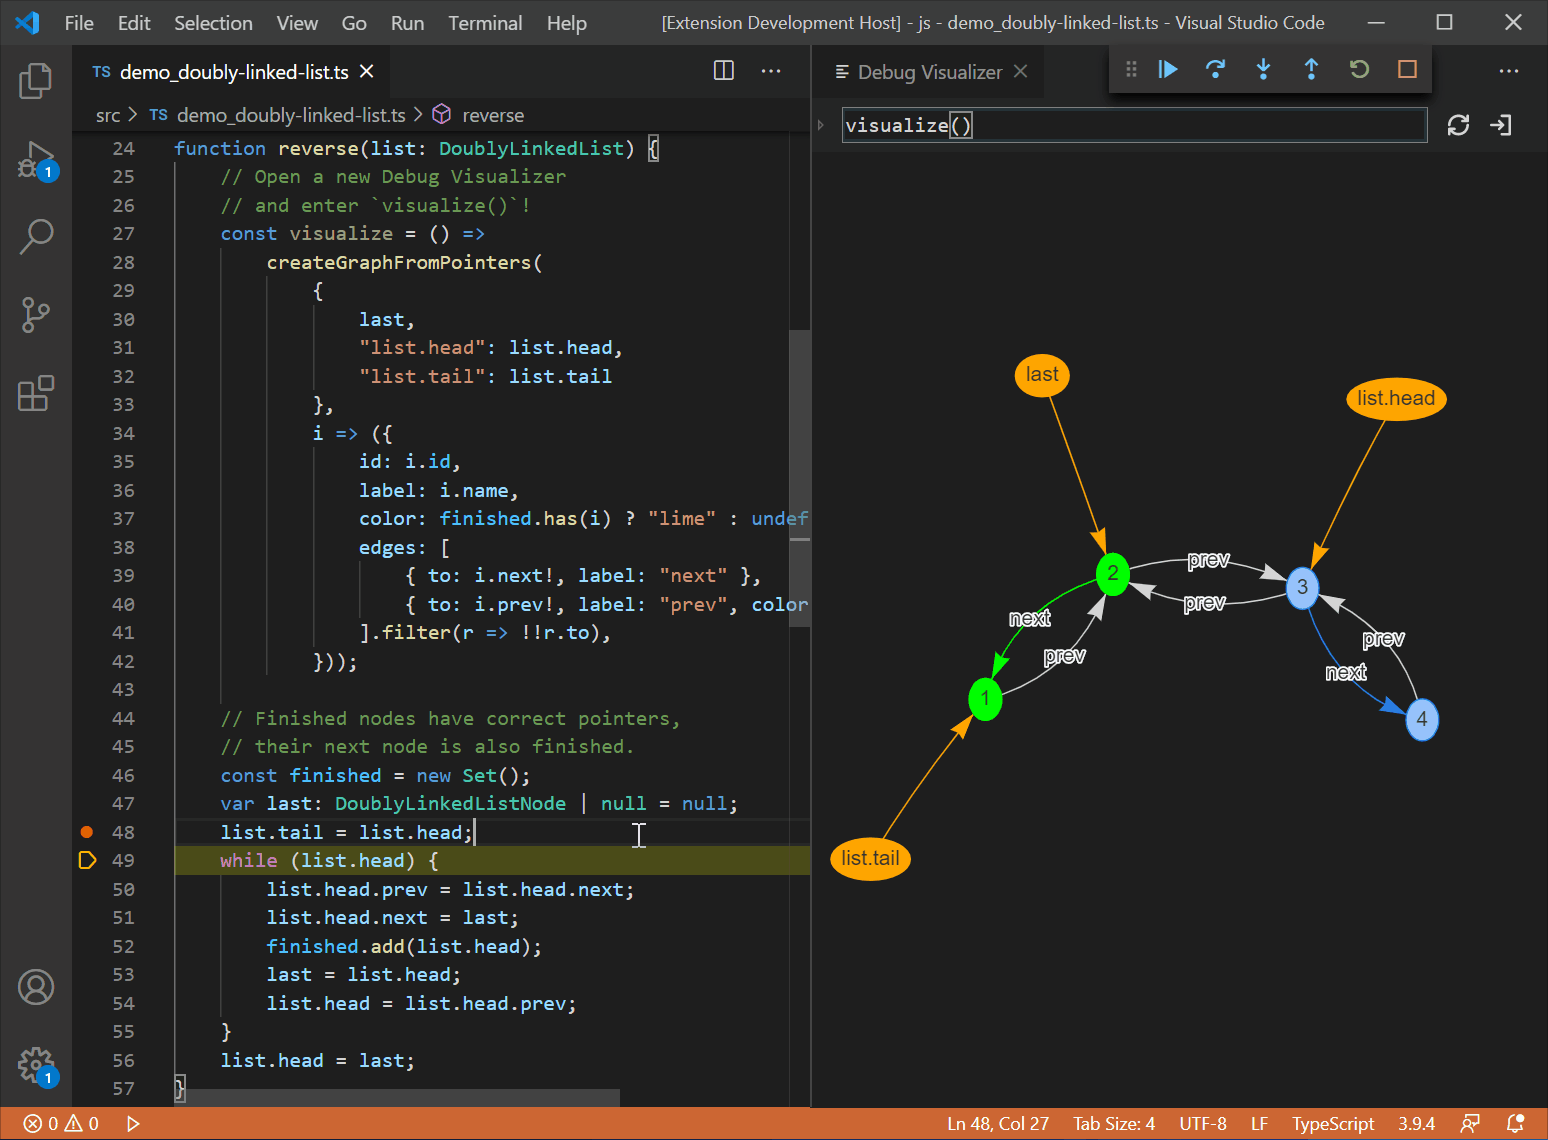 A VS Code extension that visualizes data during debugging